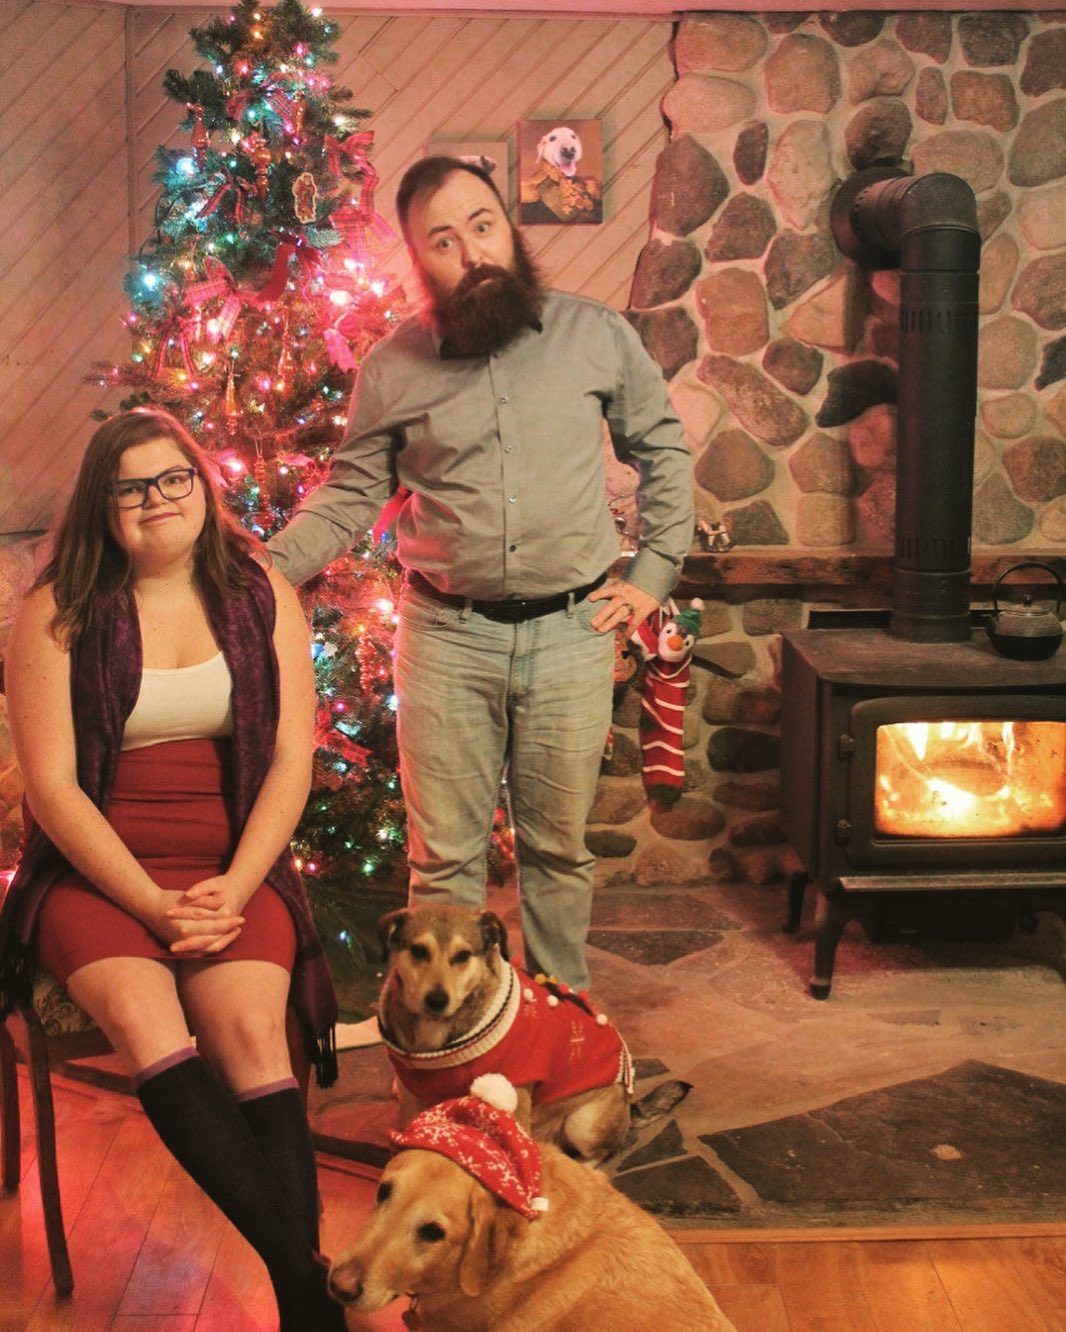 You can appreciate how hard it is to take a family photo with two dogs and a camera on a timer